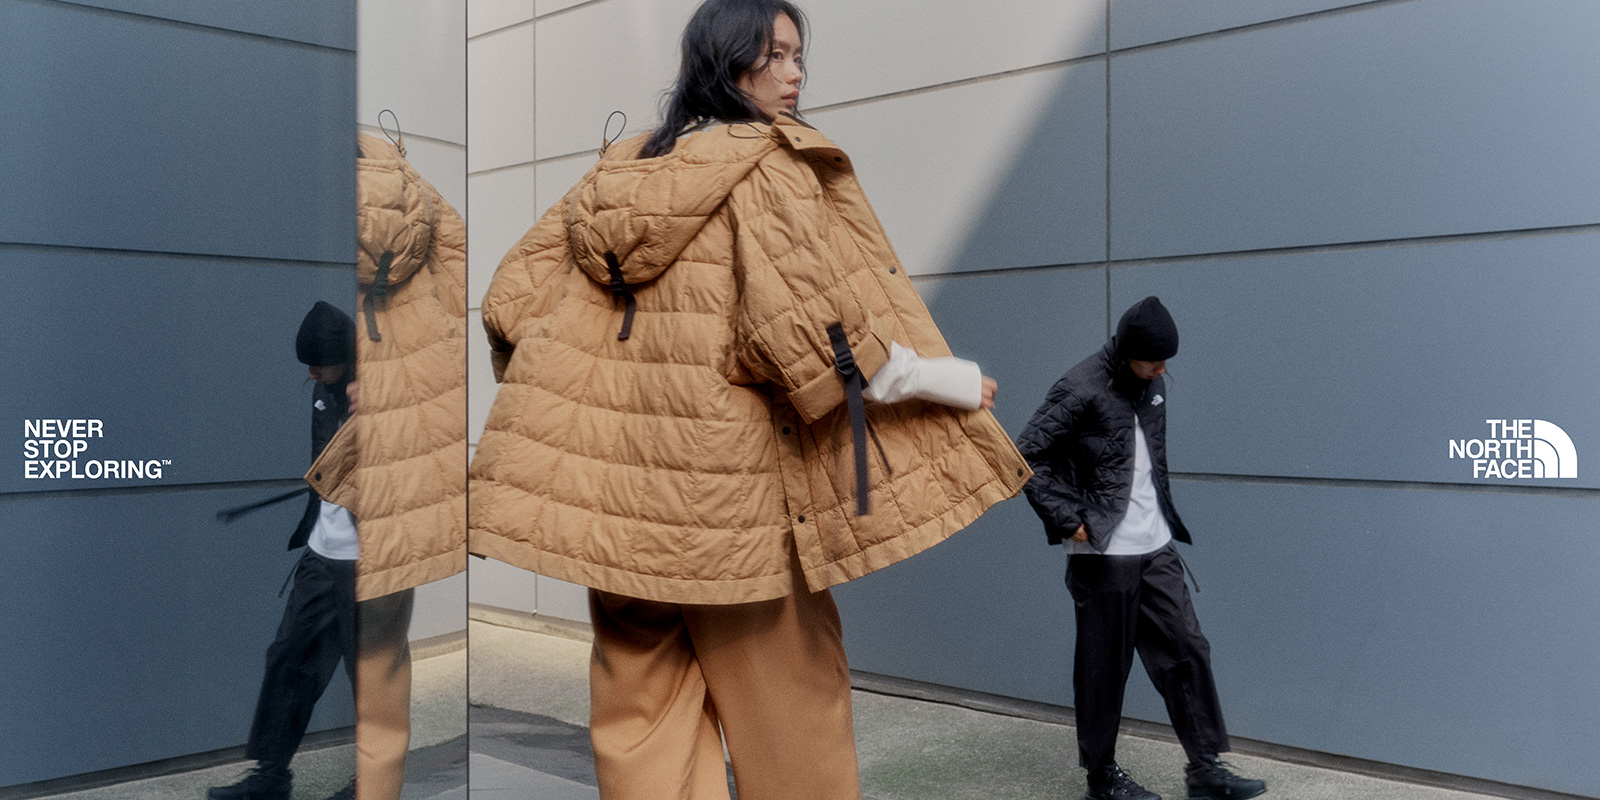 The North Face's Shanghai takeover with snow, skateboarding, street culture